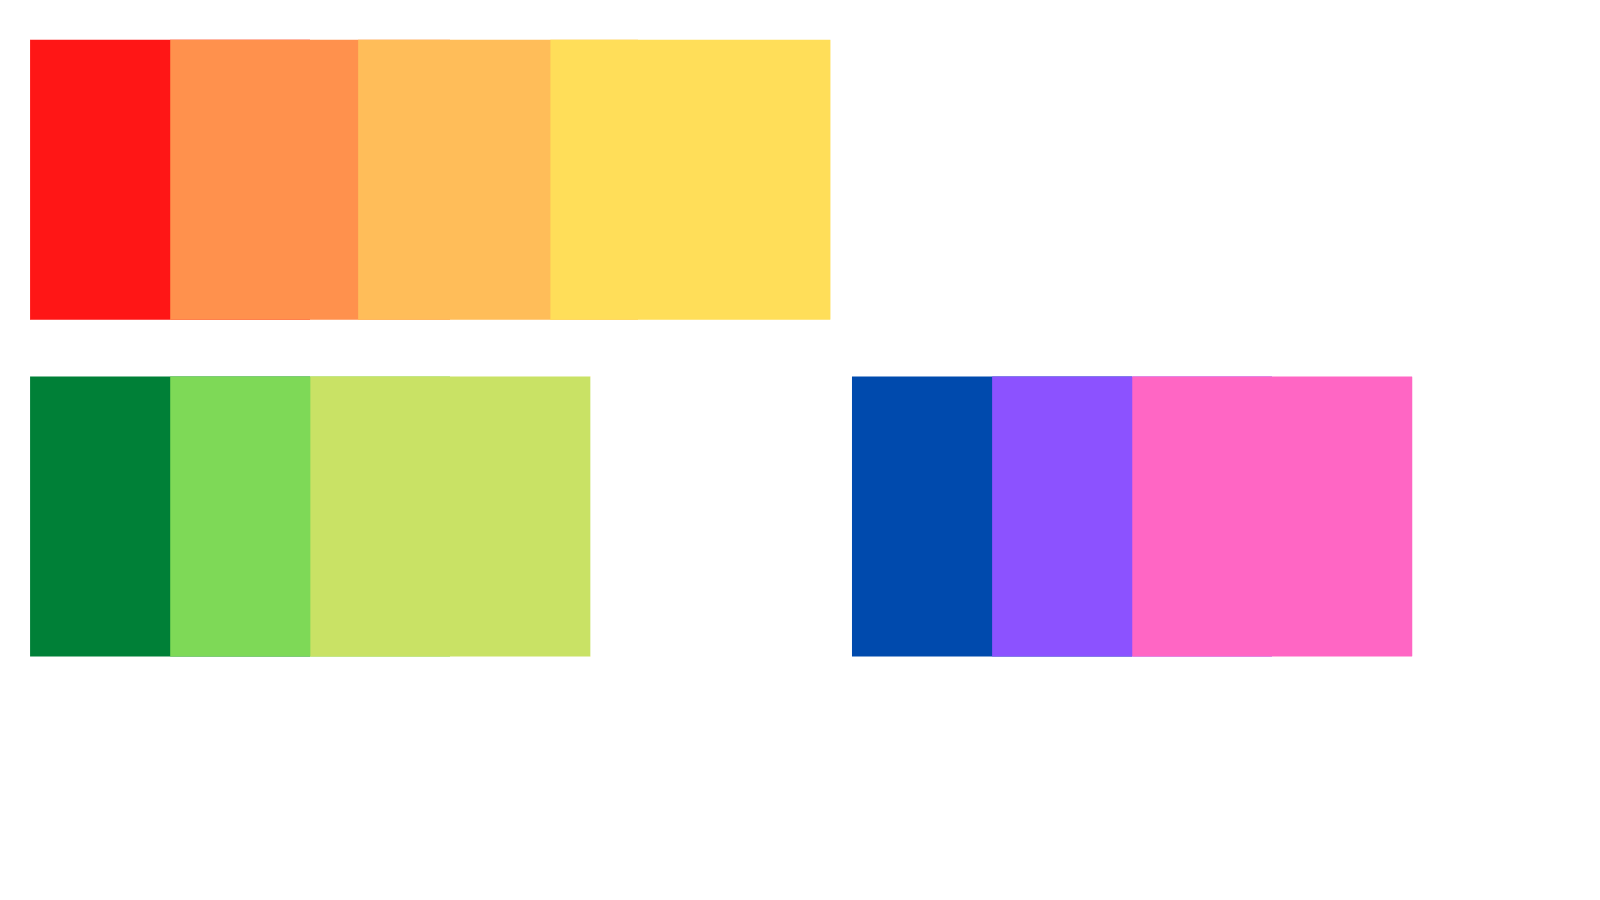 The first group of colors is red, two shades of orange, and yellow. The second is three shades of green. The third is blue, purple, and pink.